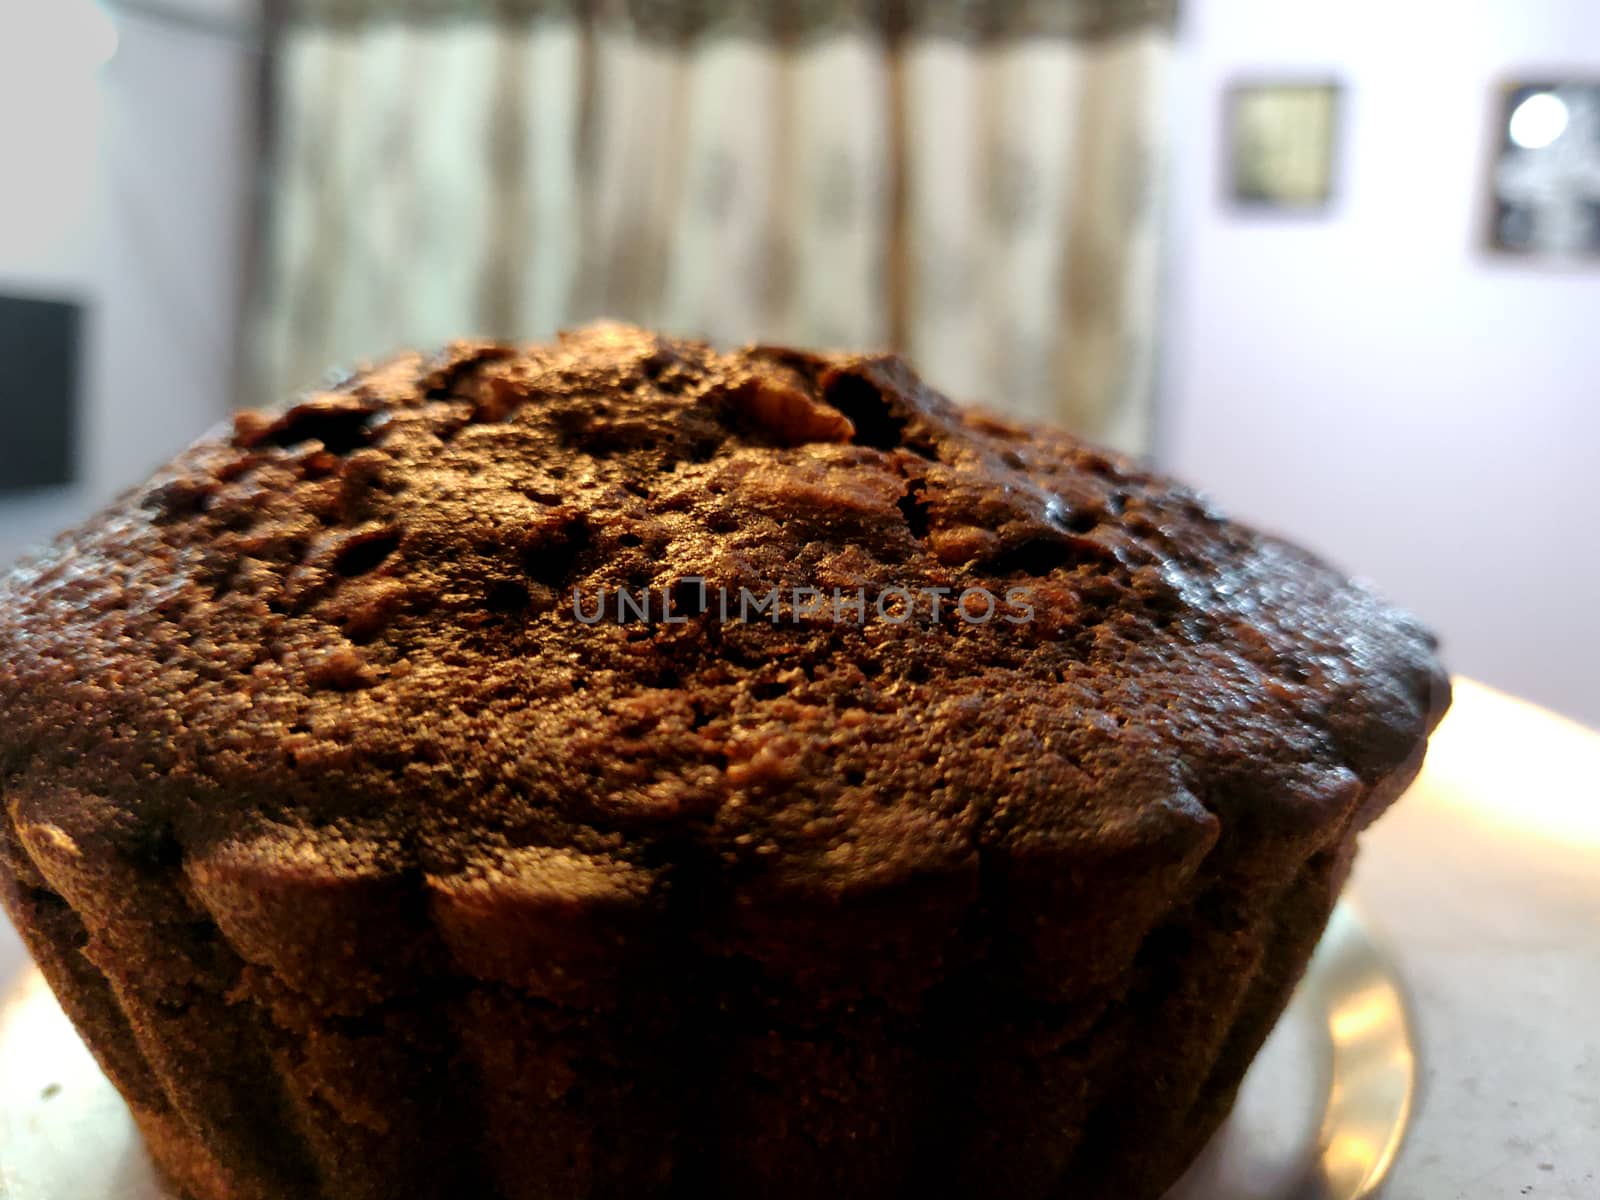 A close up of chocolate walnut muffin on a steel plate held up in the air by mshivangi92